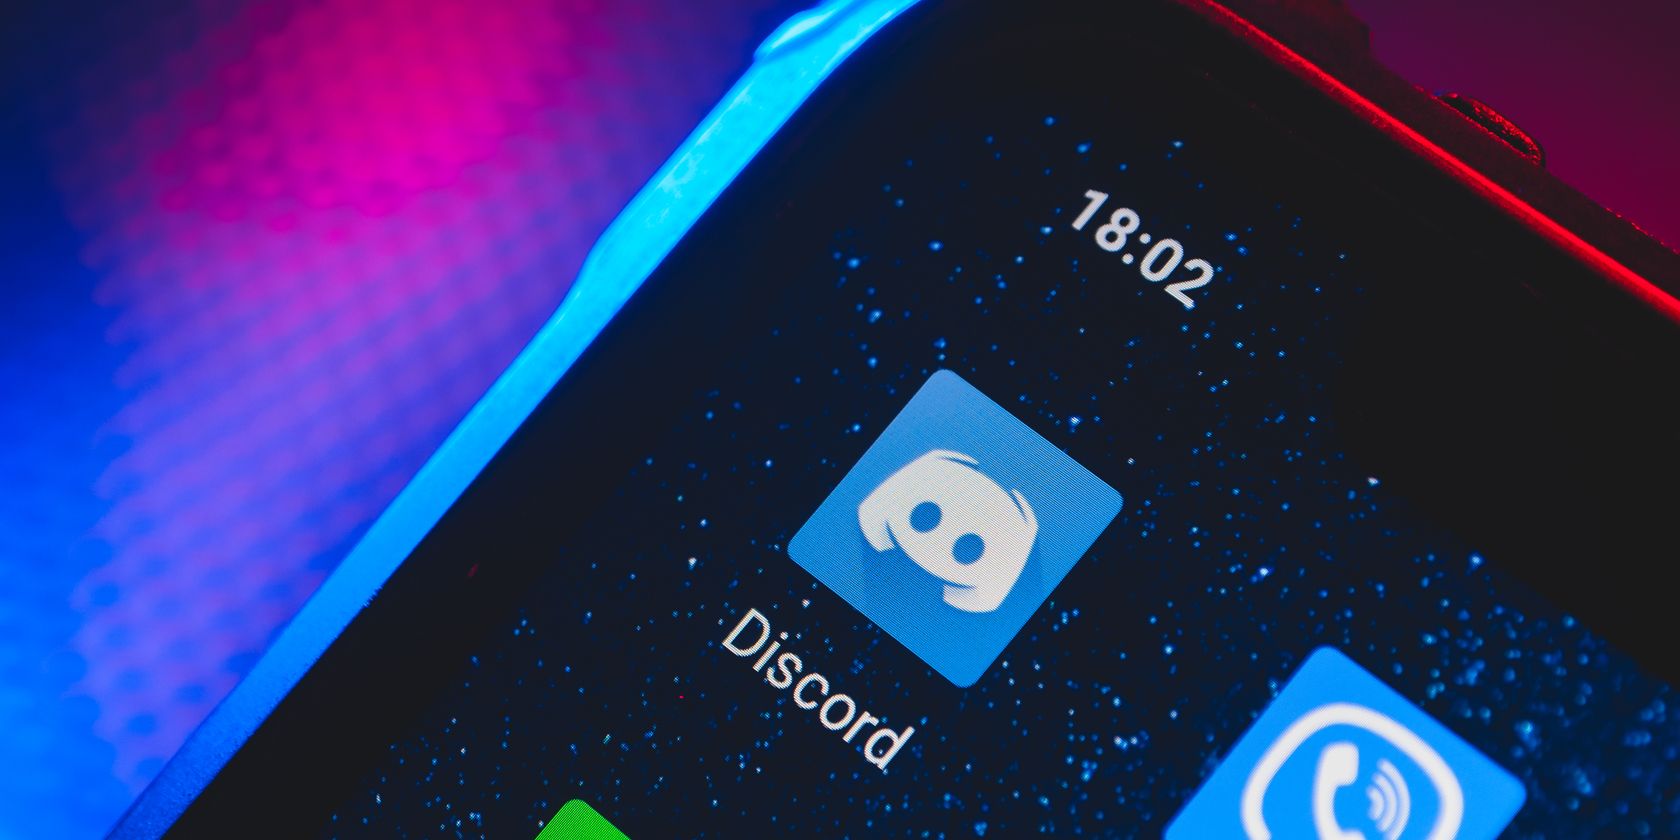 Discord Rolls Out PlayStation Network Account Integration: Here's How to  Connect